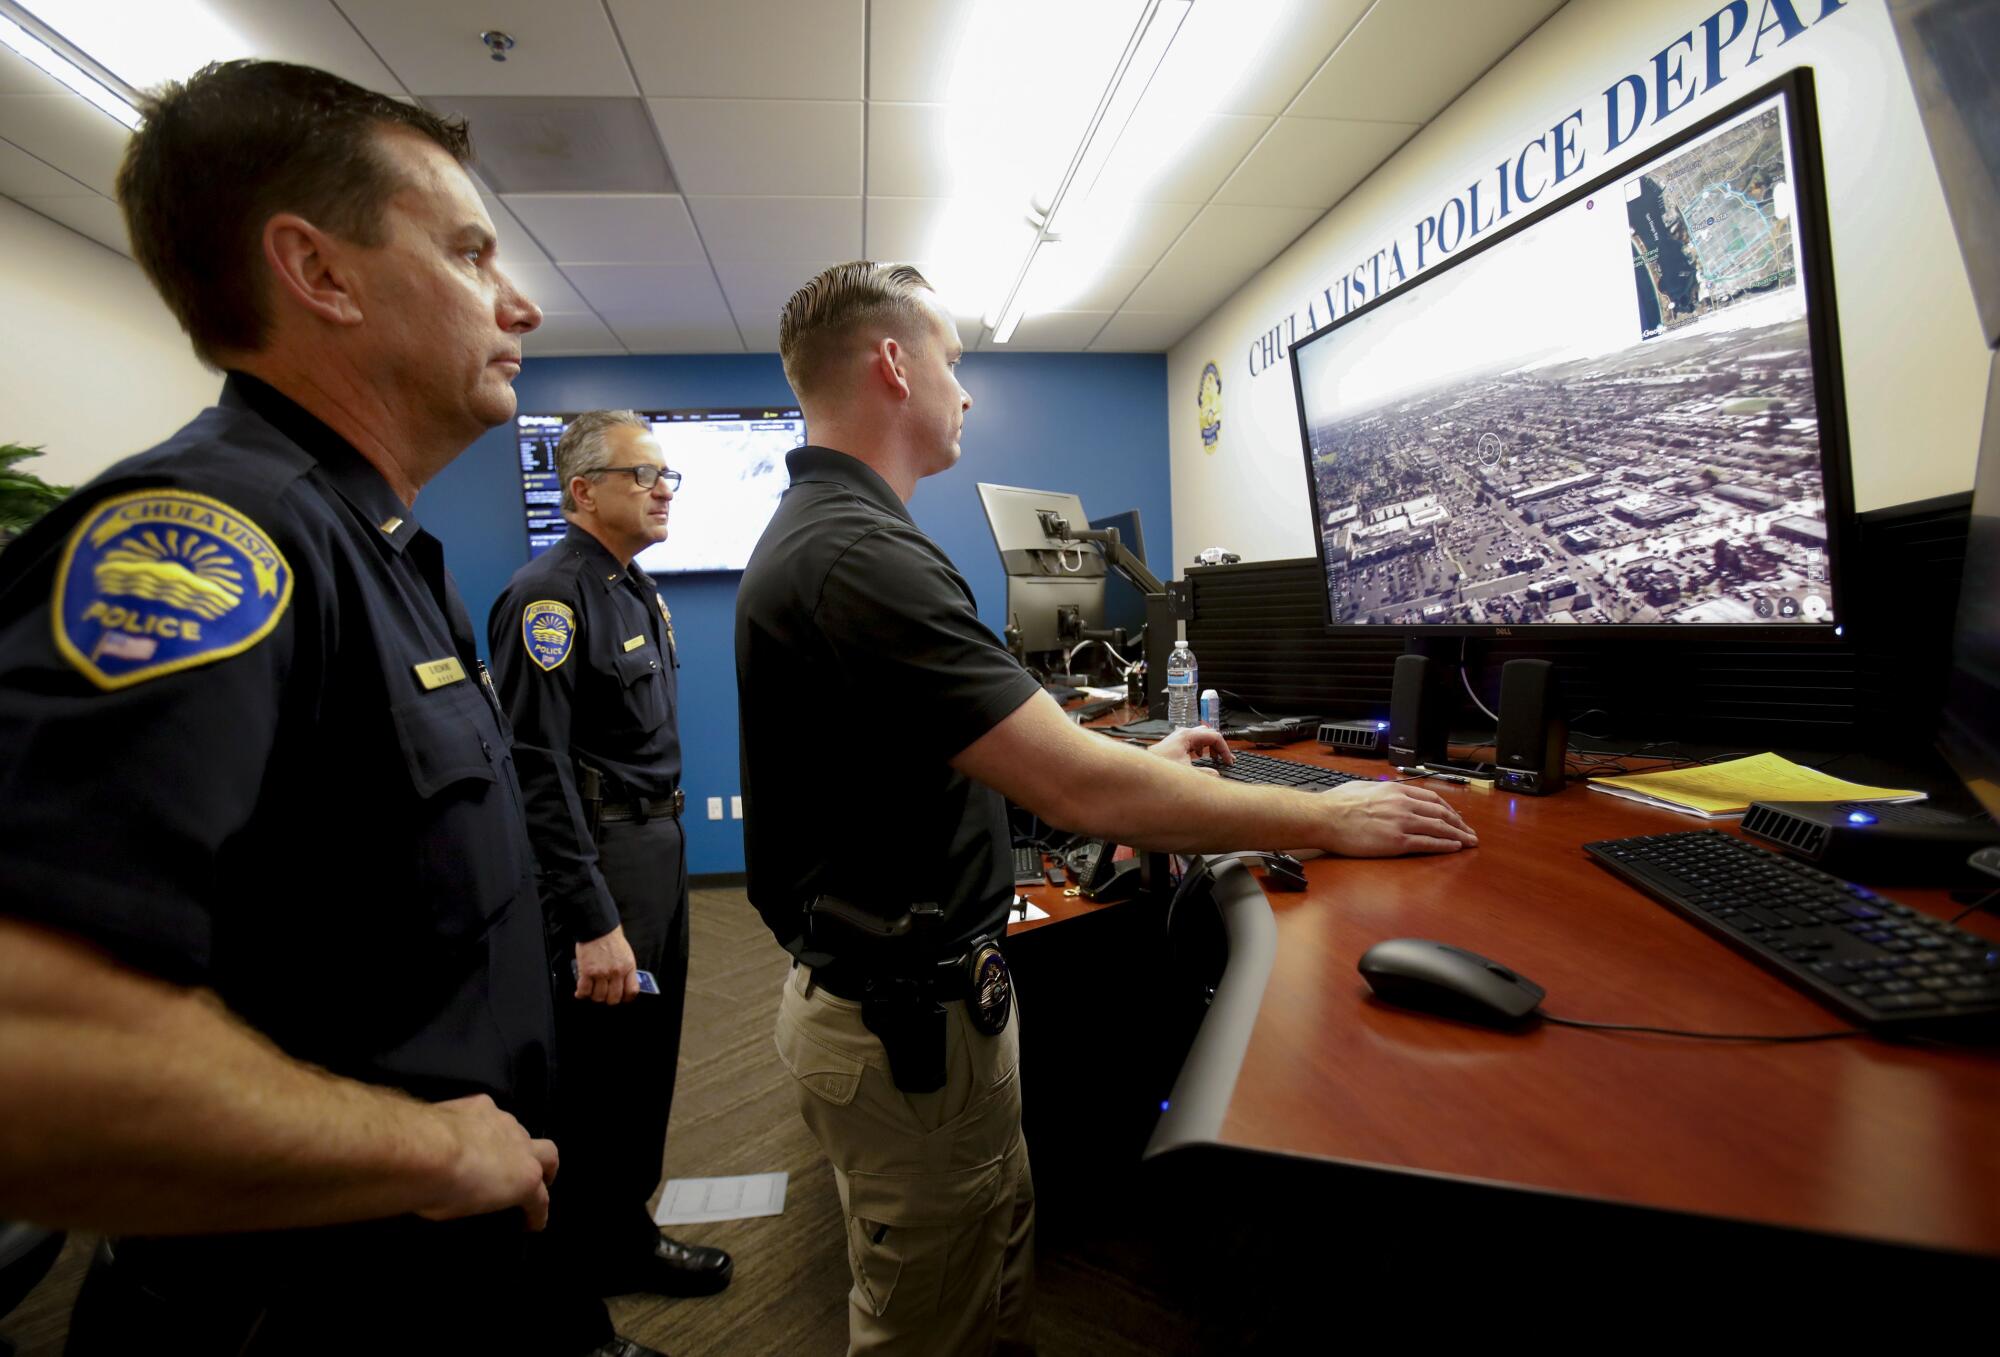 Chula Vista Police Department's DFR Operations Center (Drone First Responder)